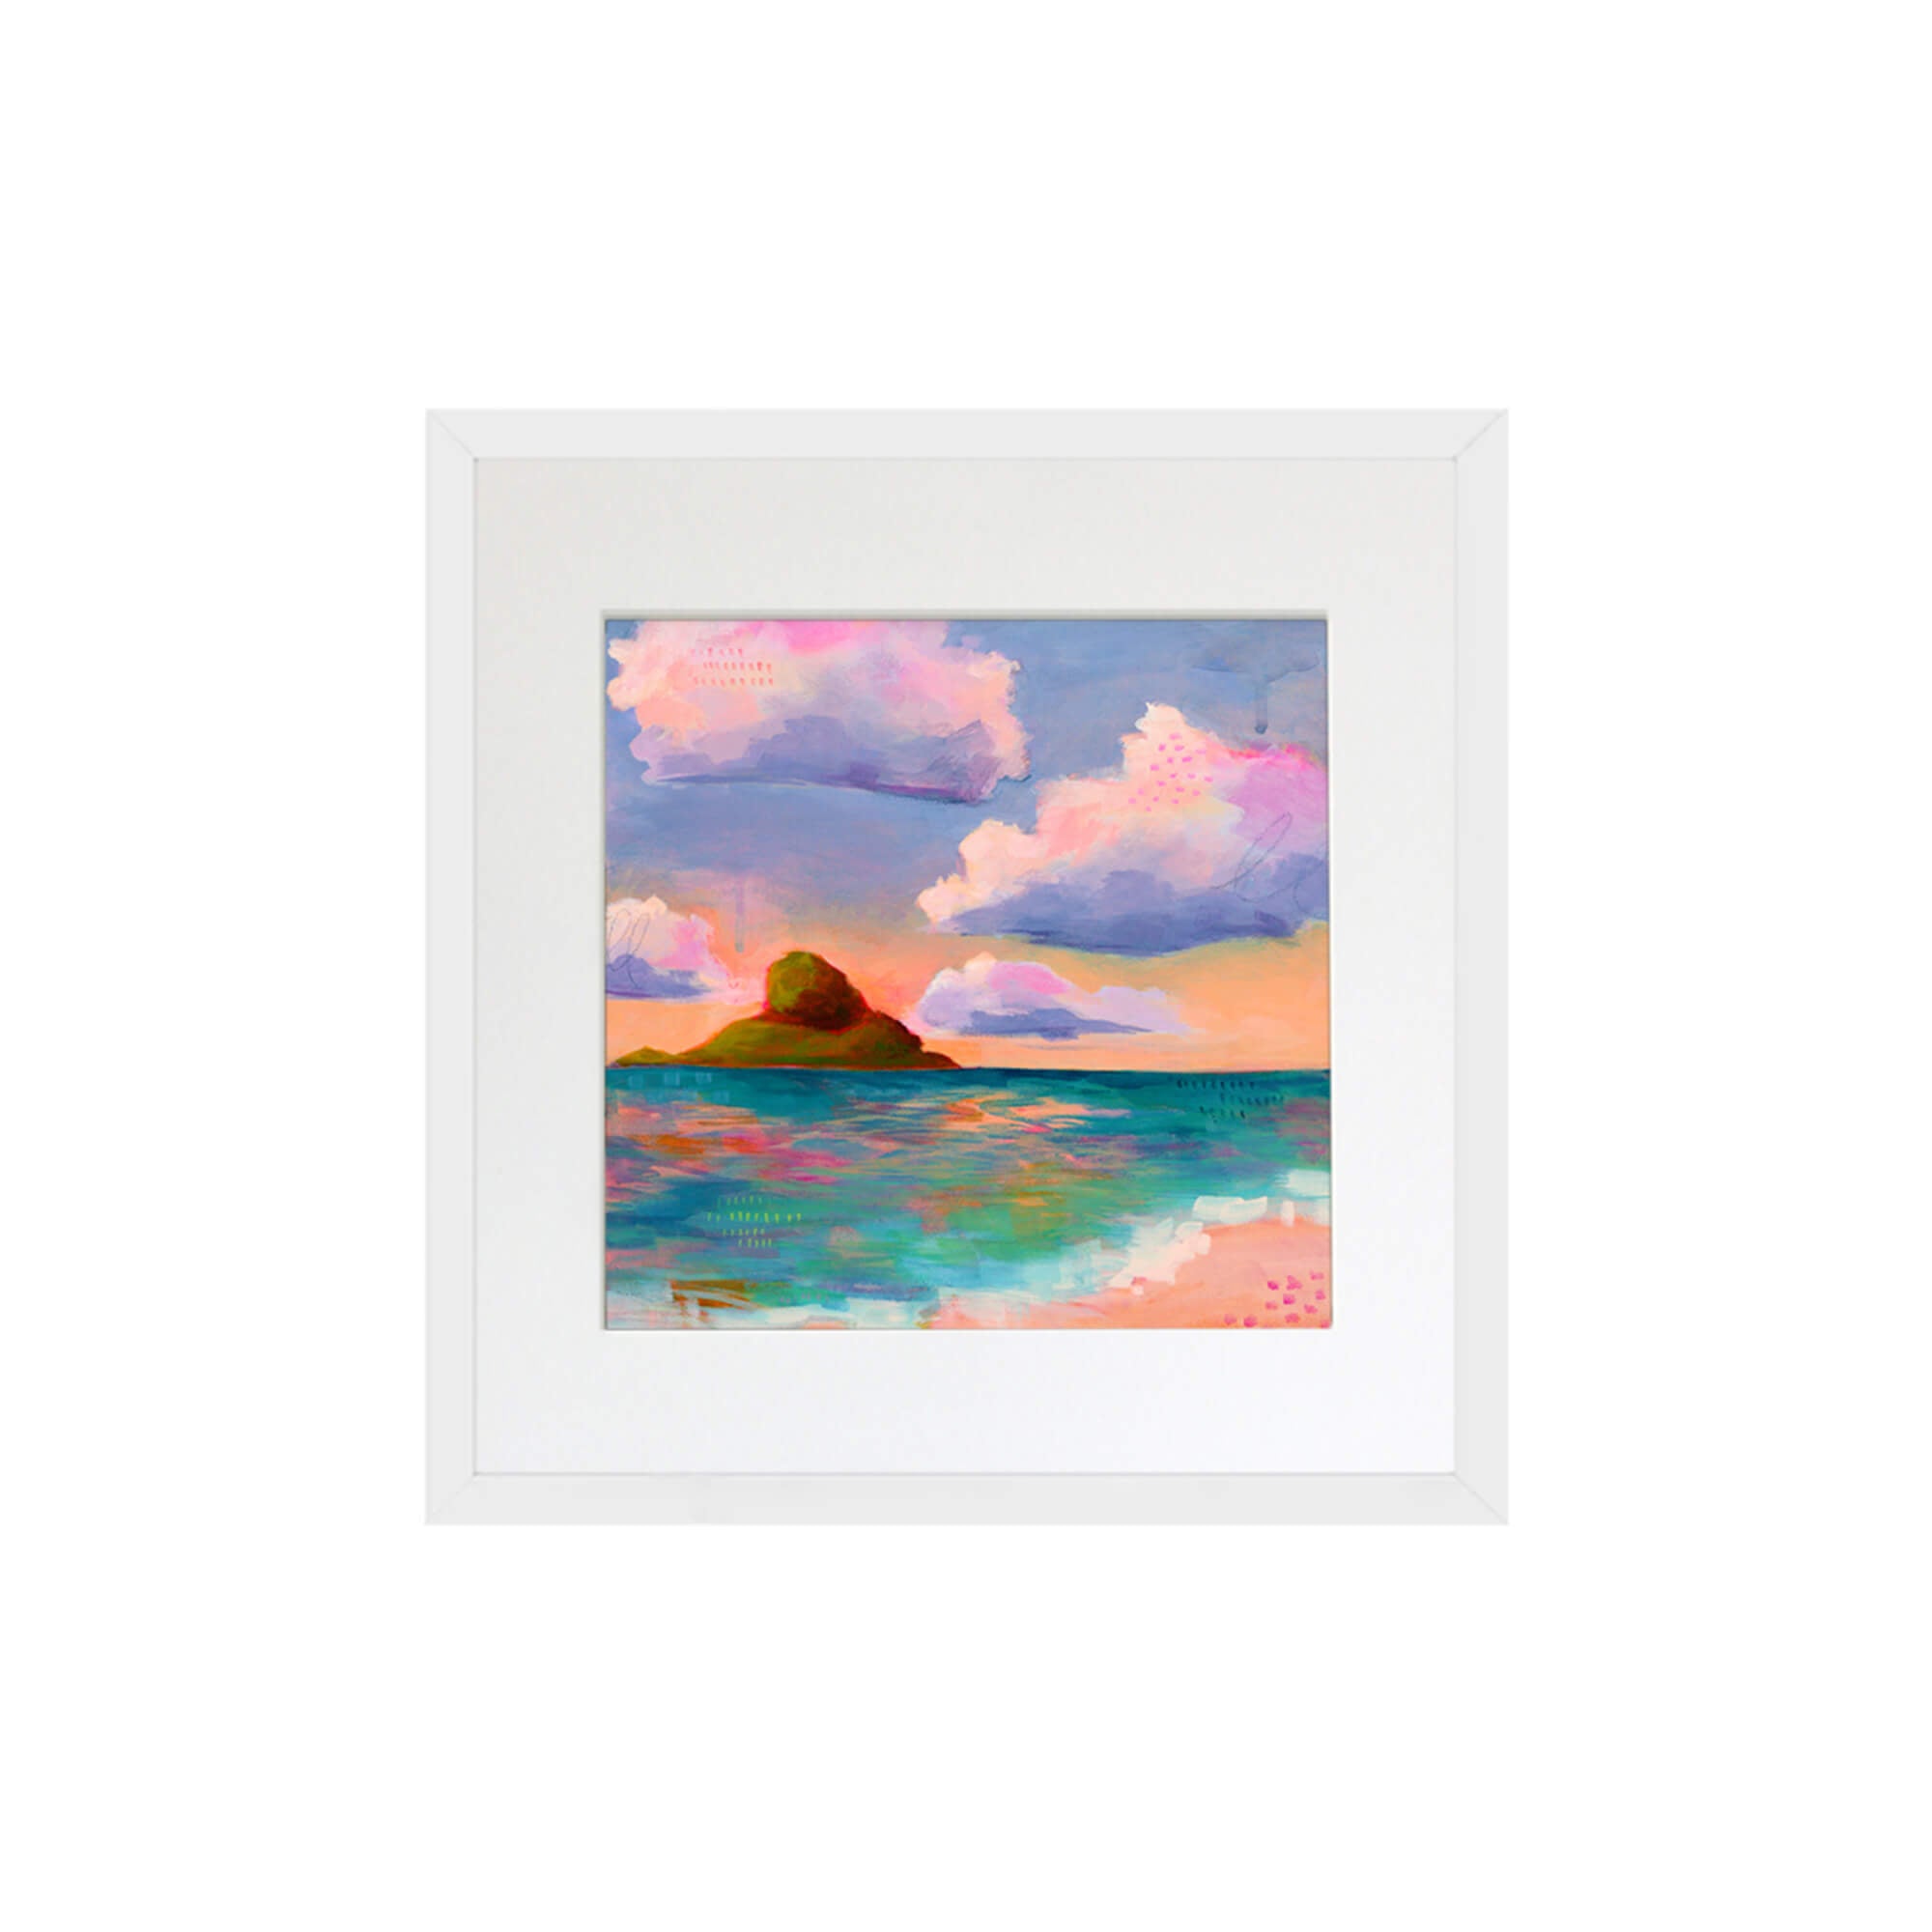 A stunning seascape with different colors by Hawaii artist Lindsay Wilkins